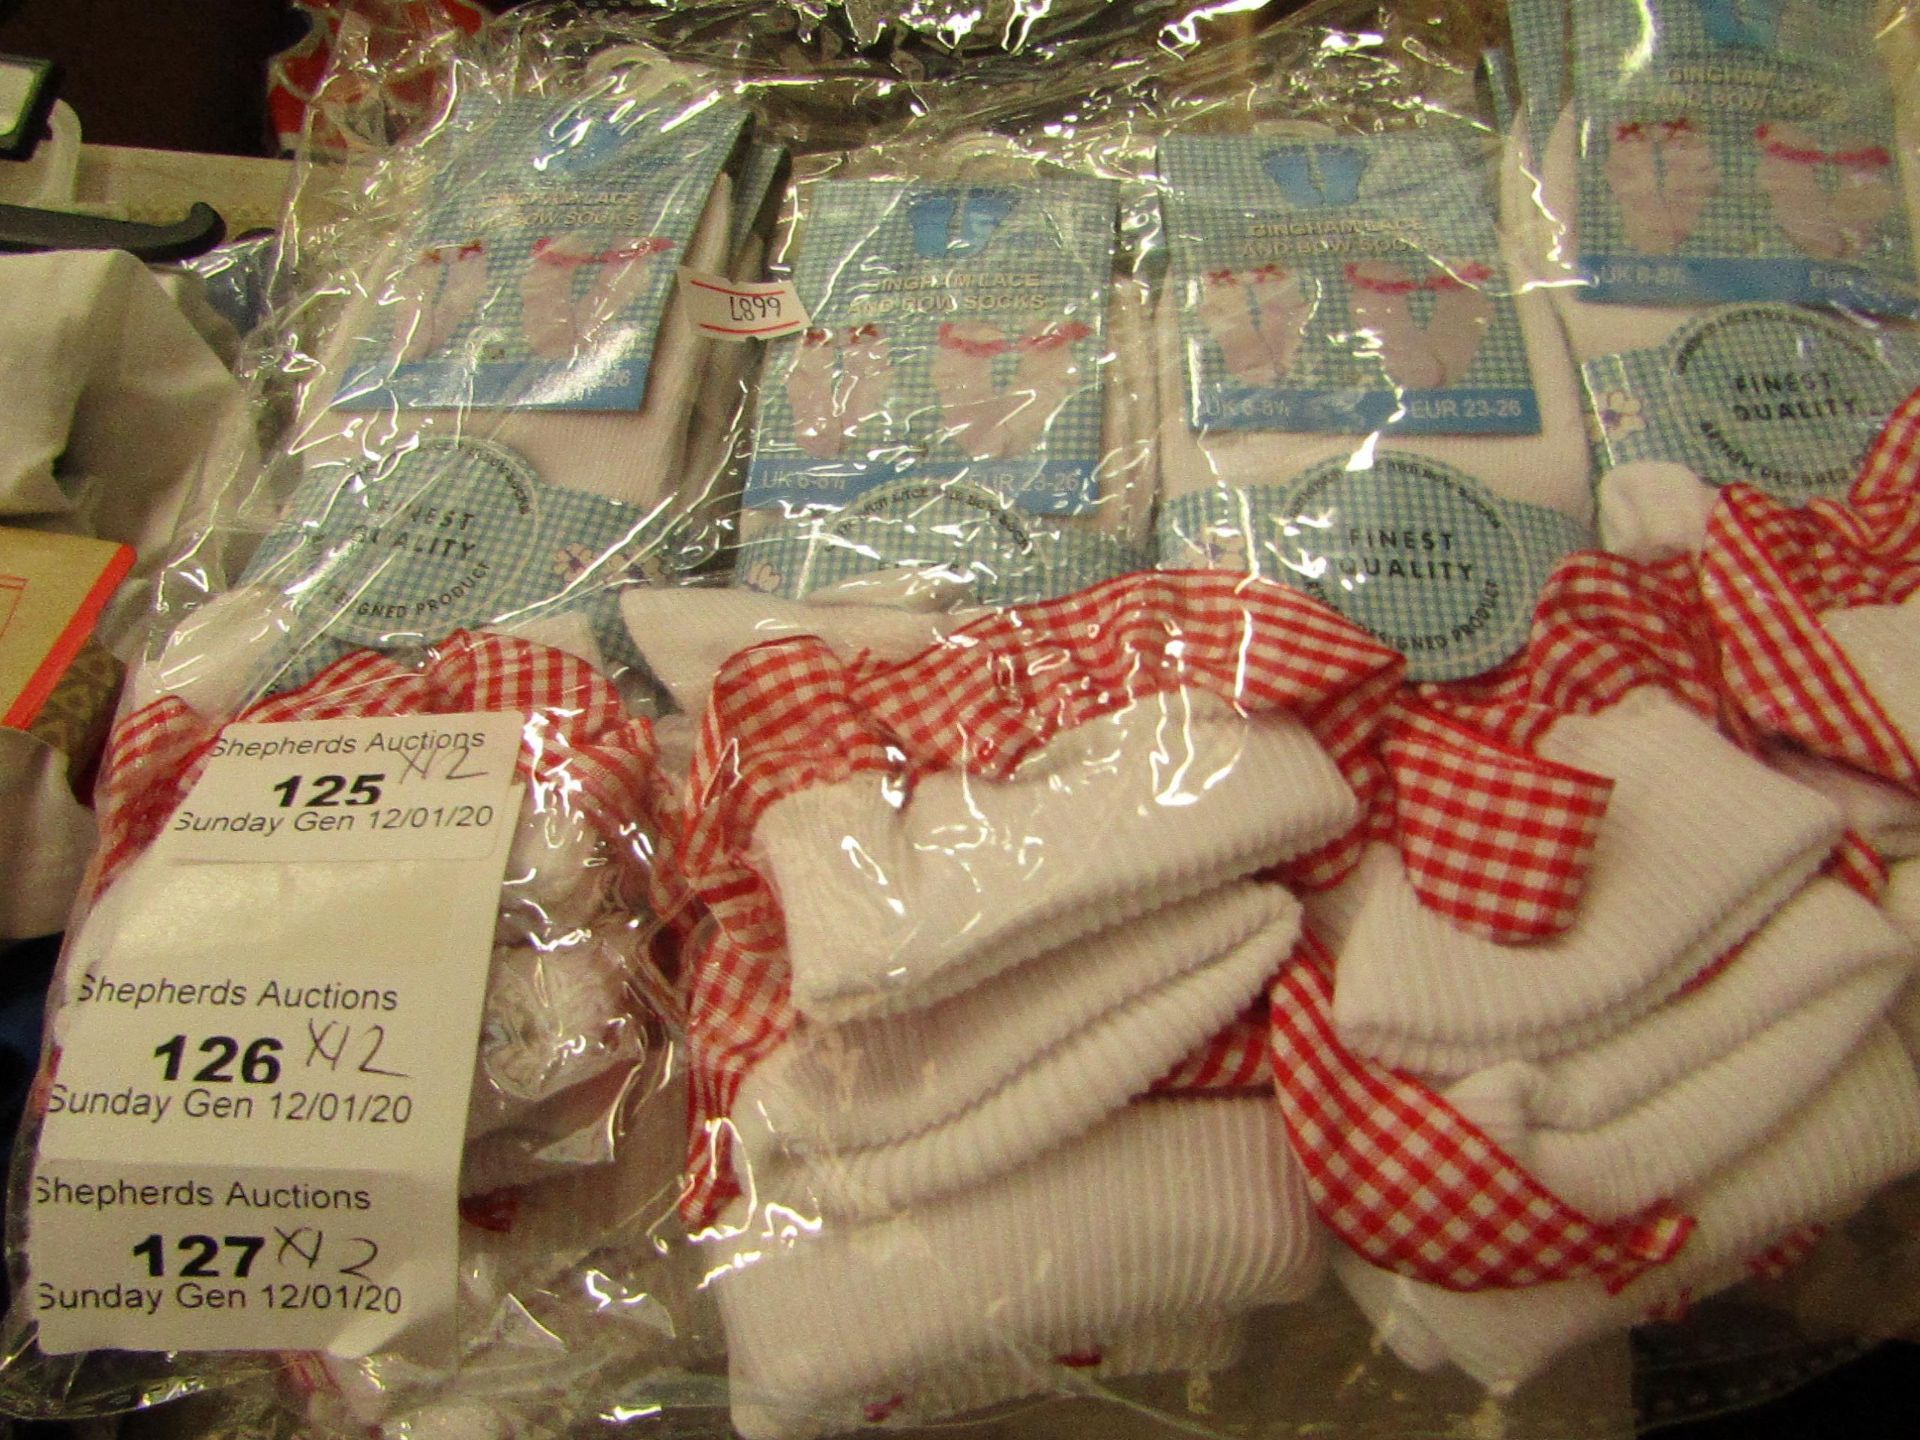 12 Pairs of Size 6 - 8.5 Gingham Lace & Bow Socks. New with tags